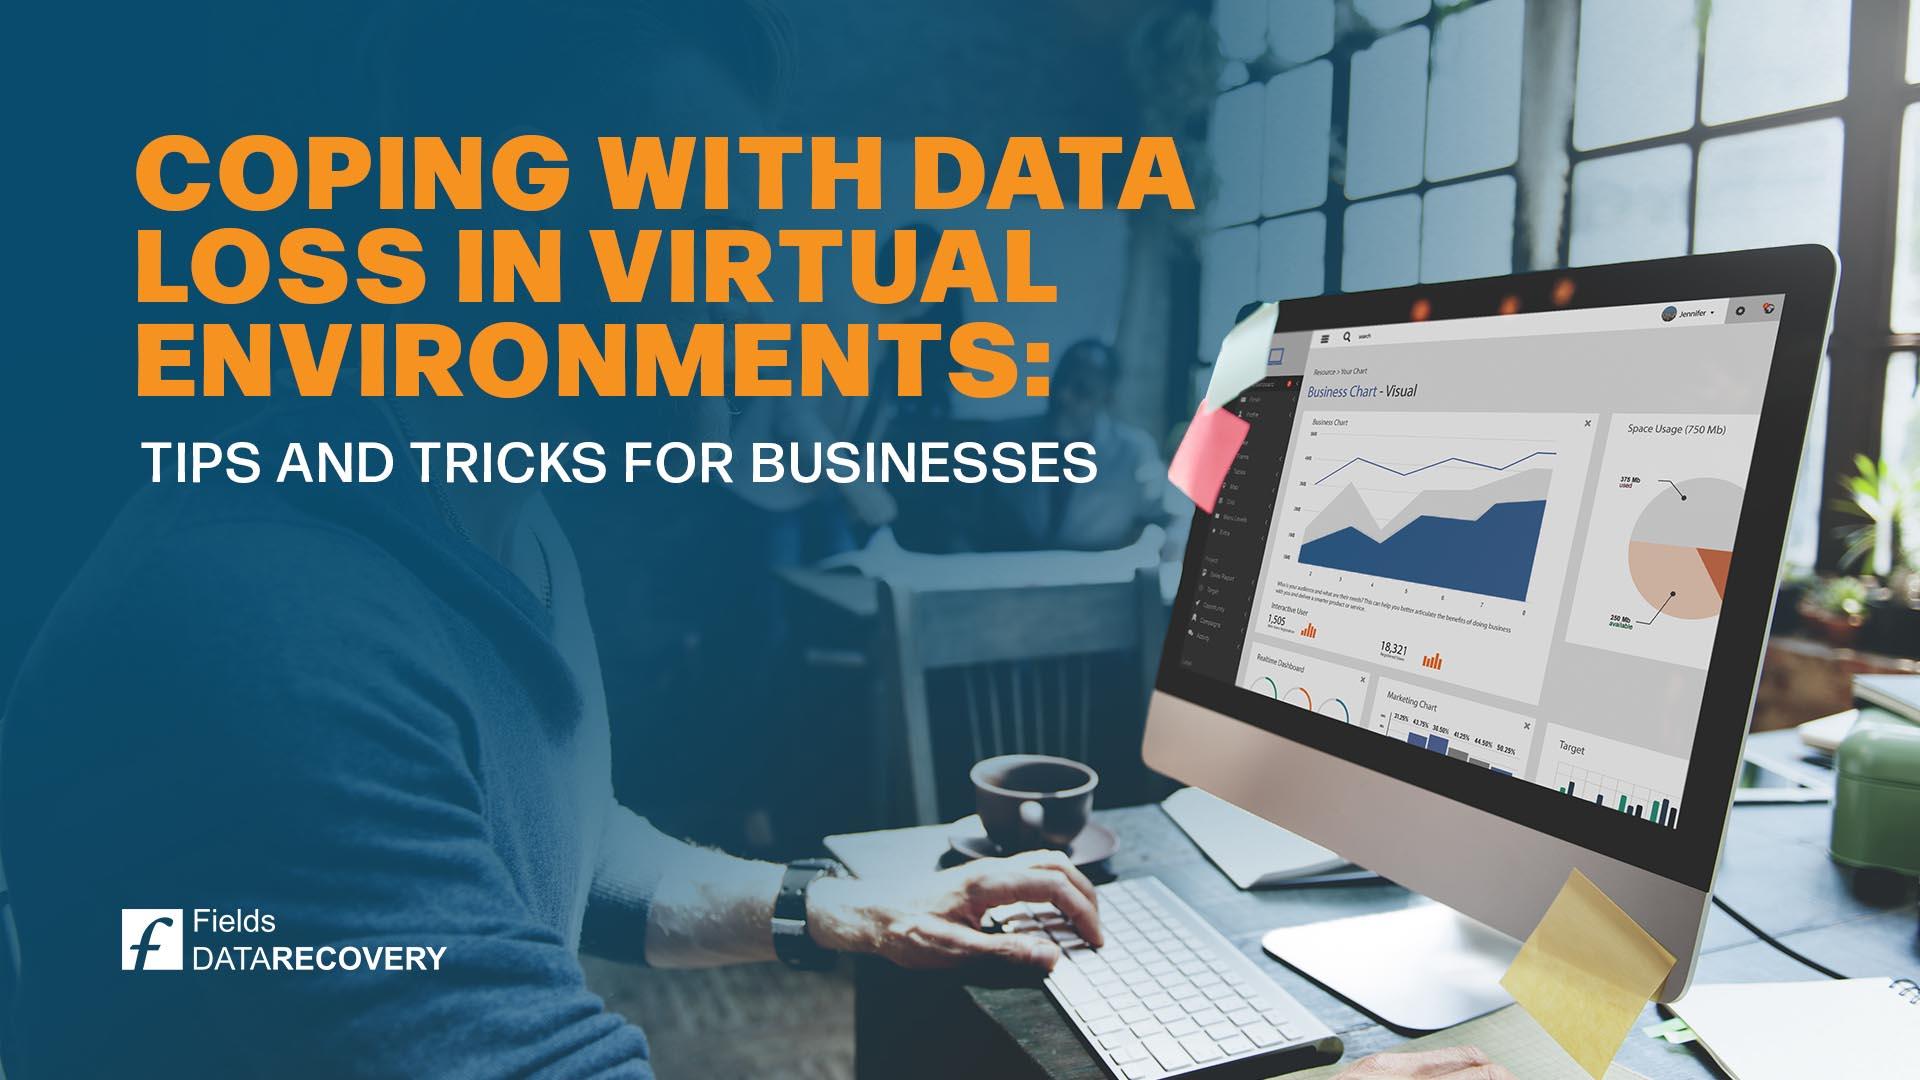 Coping with Data Loss in Virtual Environments: Tips and Tricks for Businesses